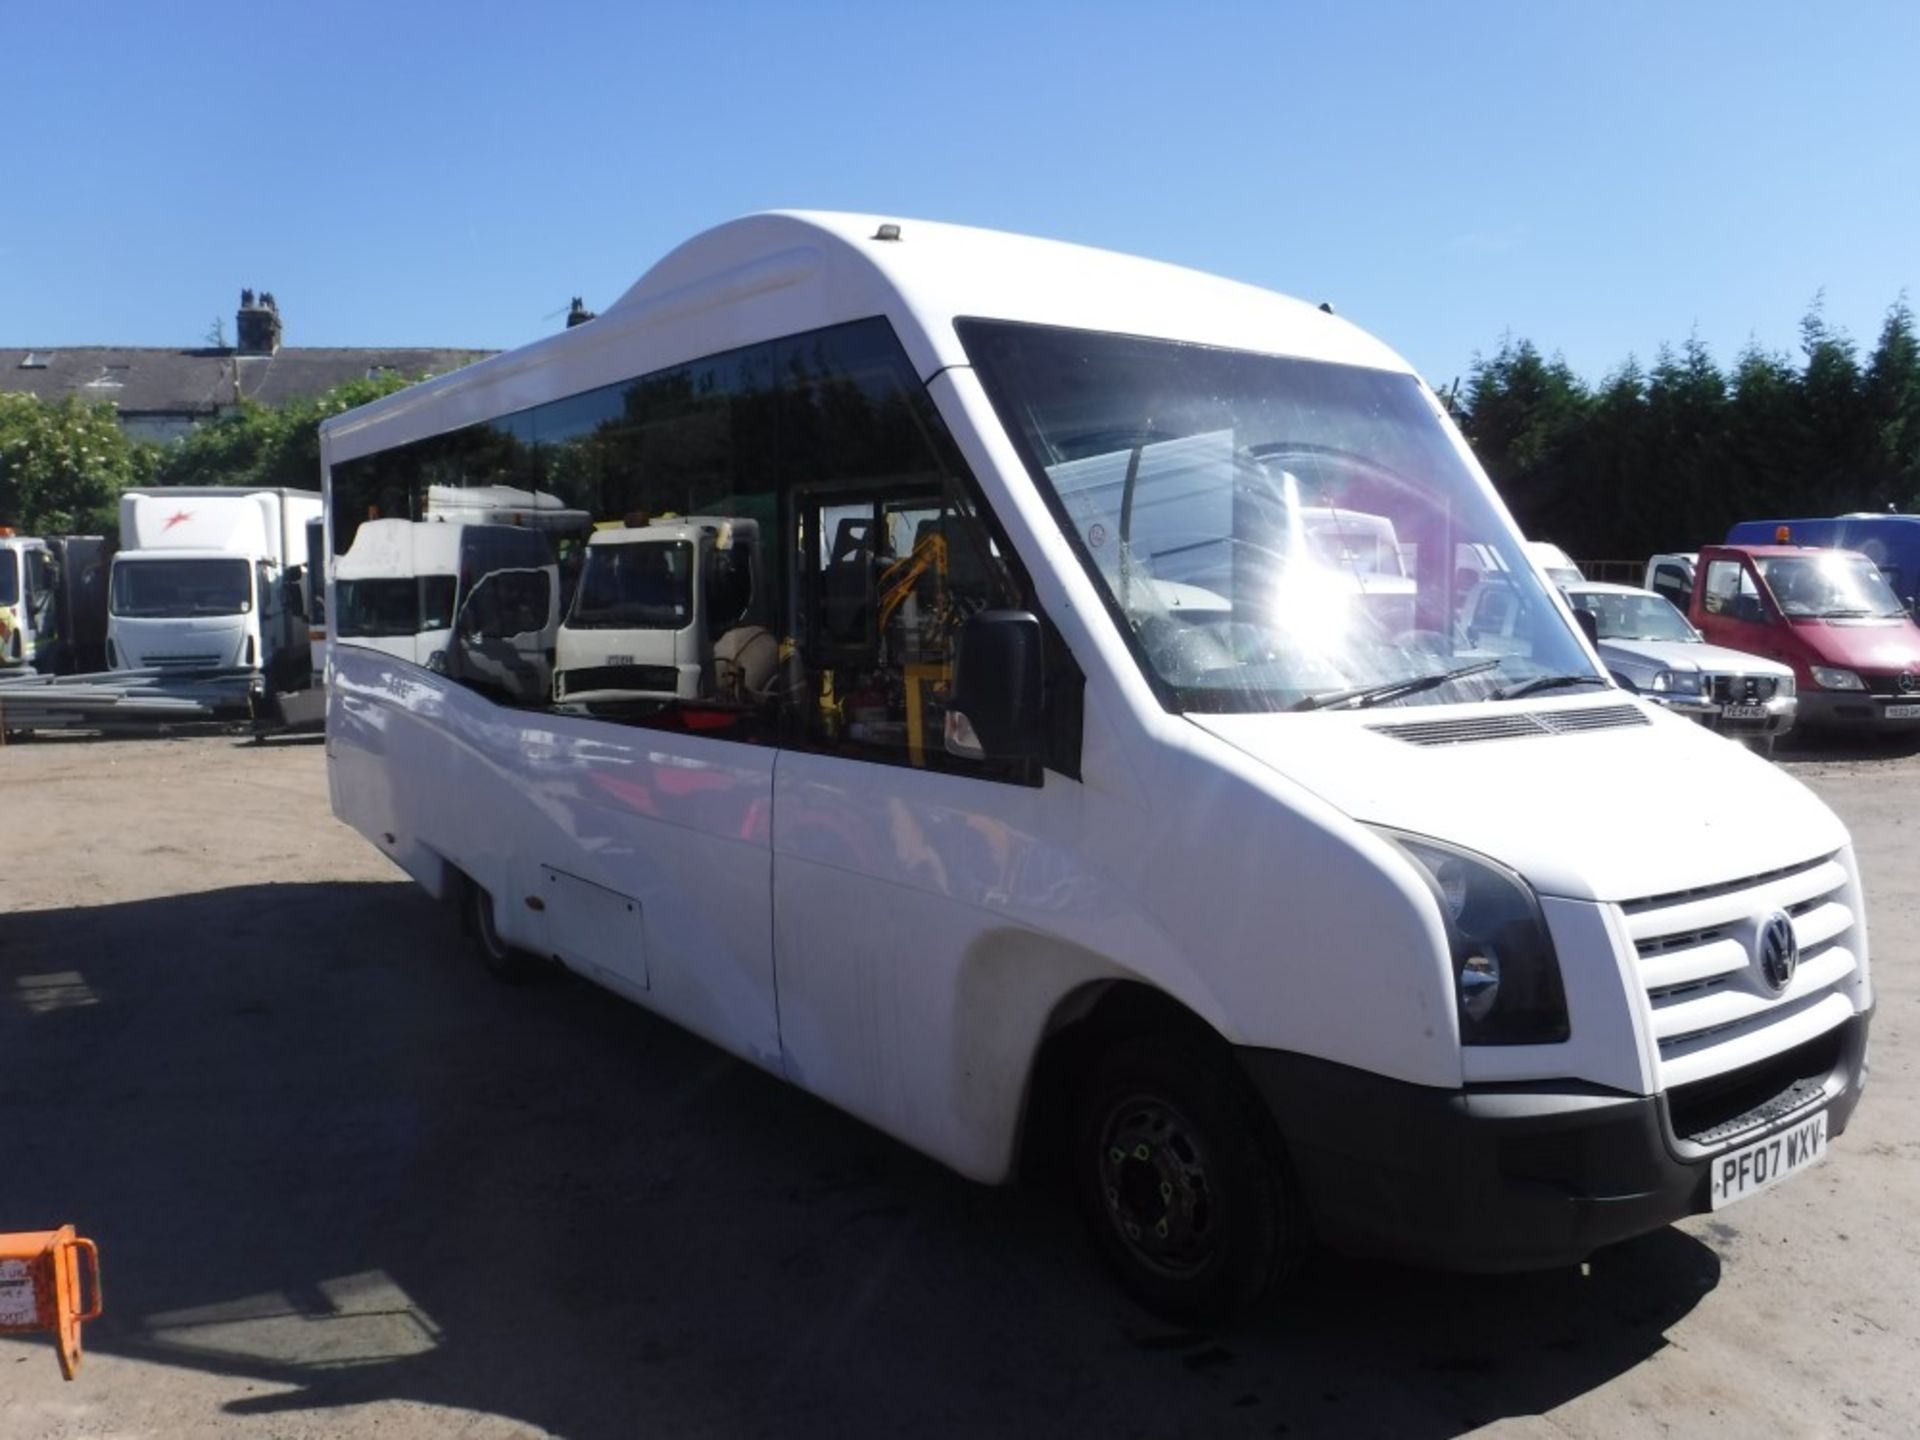 07 reg VW CRAFTER ACCESSIBLE MINIBUS (DIRECT COUNCIL) 1ST REG 08/07, TEST 08/18, 112780M, V5 HERE, 1